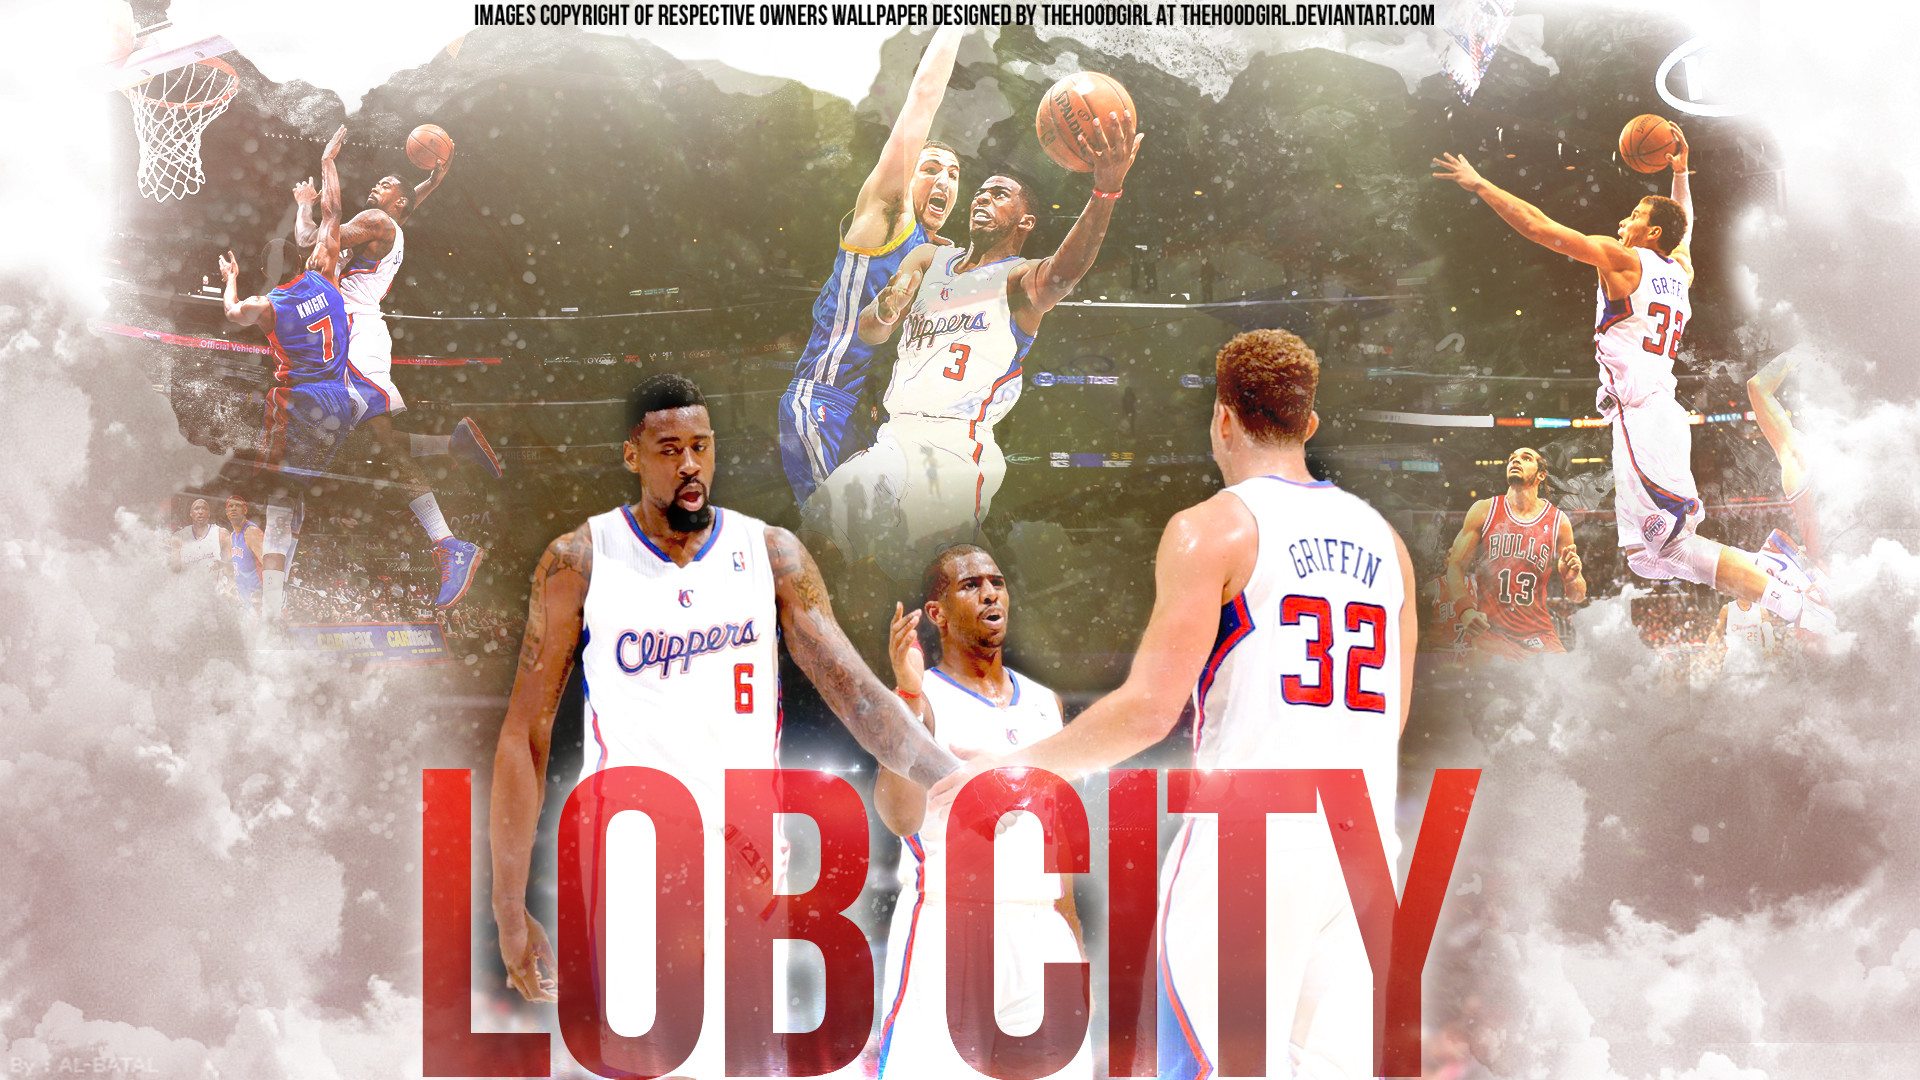 Los Angeles Clippers Lob City Wallpaper 1920x1080 By Thehoodgirl 1920x1080